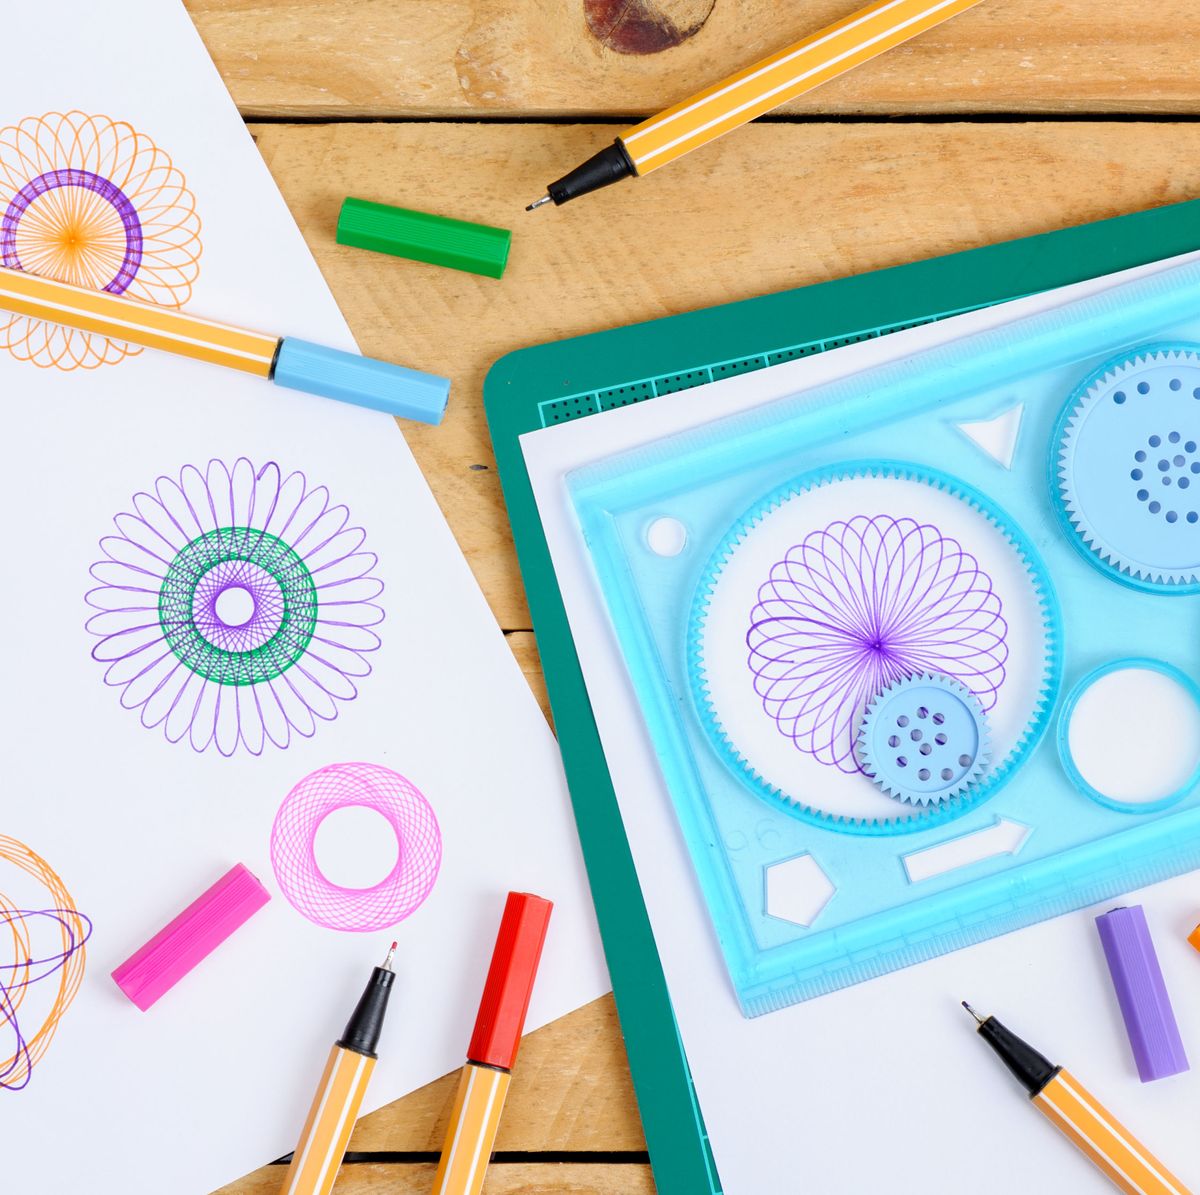 Get the ultimate Spirograph experience with this collector's set –